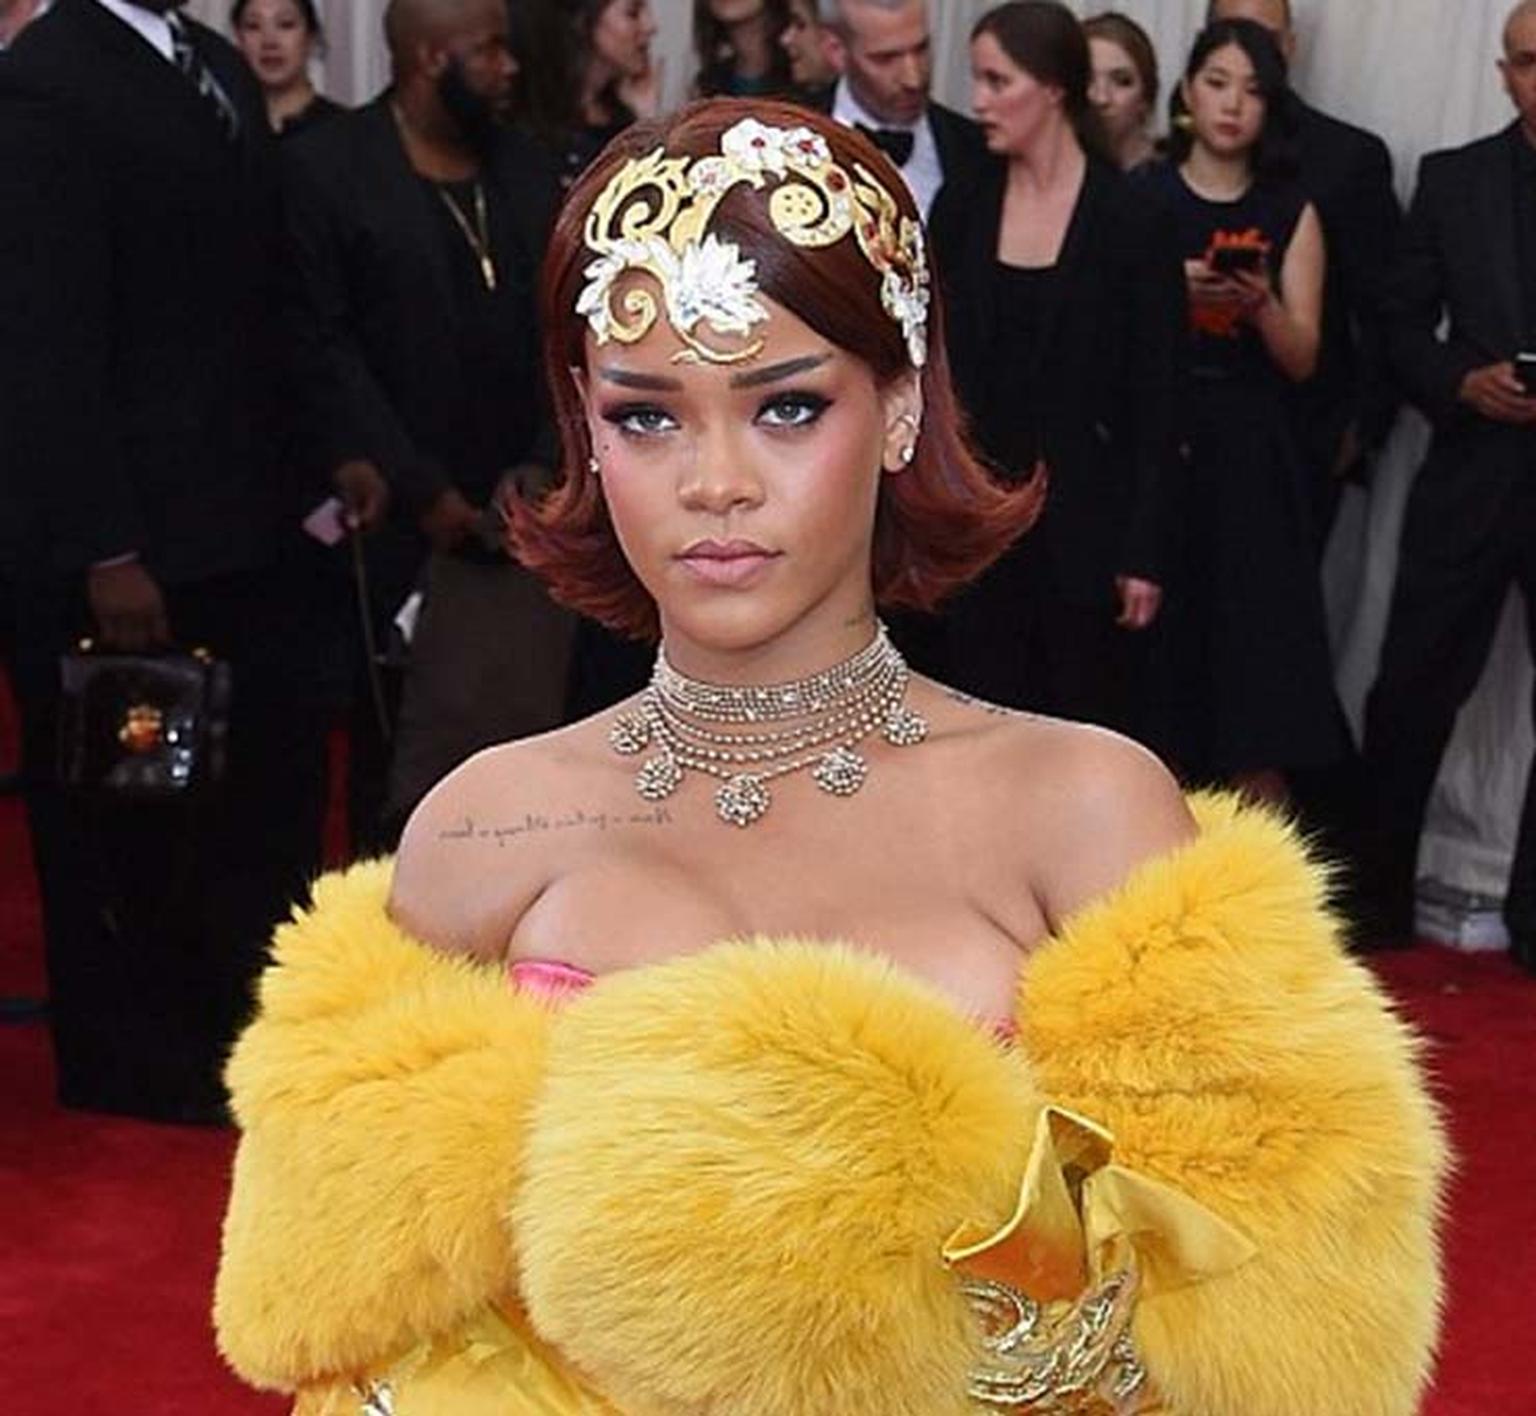 Rihanna made the entrance of the night at this year's Met Gala, accessorizing her show-stopping couture gown - designed by Guo Pei, whose work features in the exhibition - with a golden headpiece and Cartier Paris Nouvelle Vague necklace.